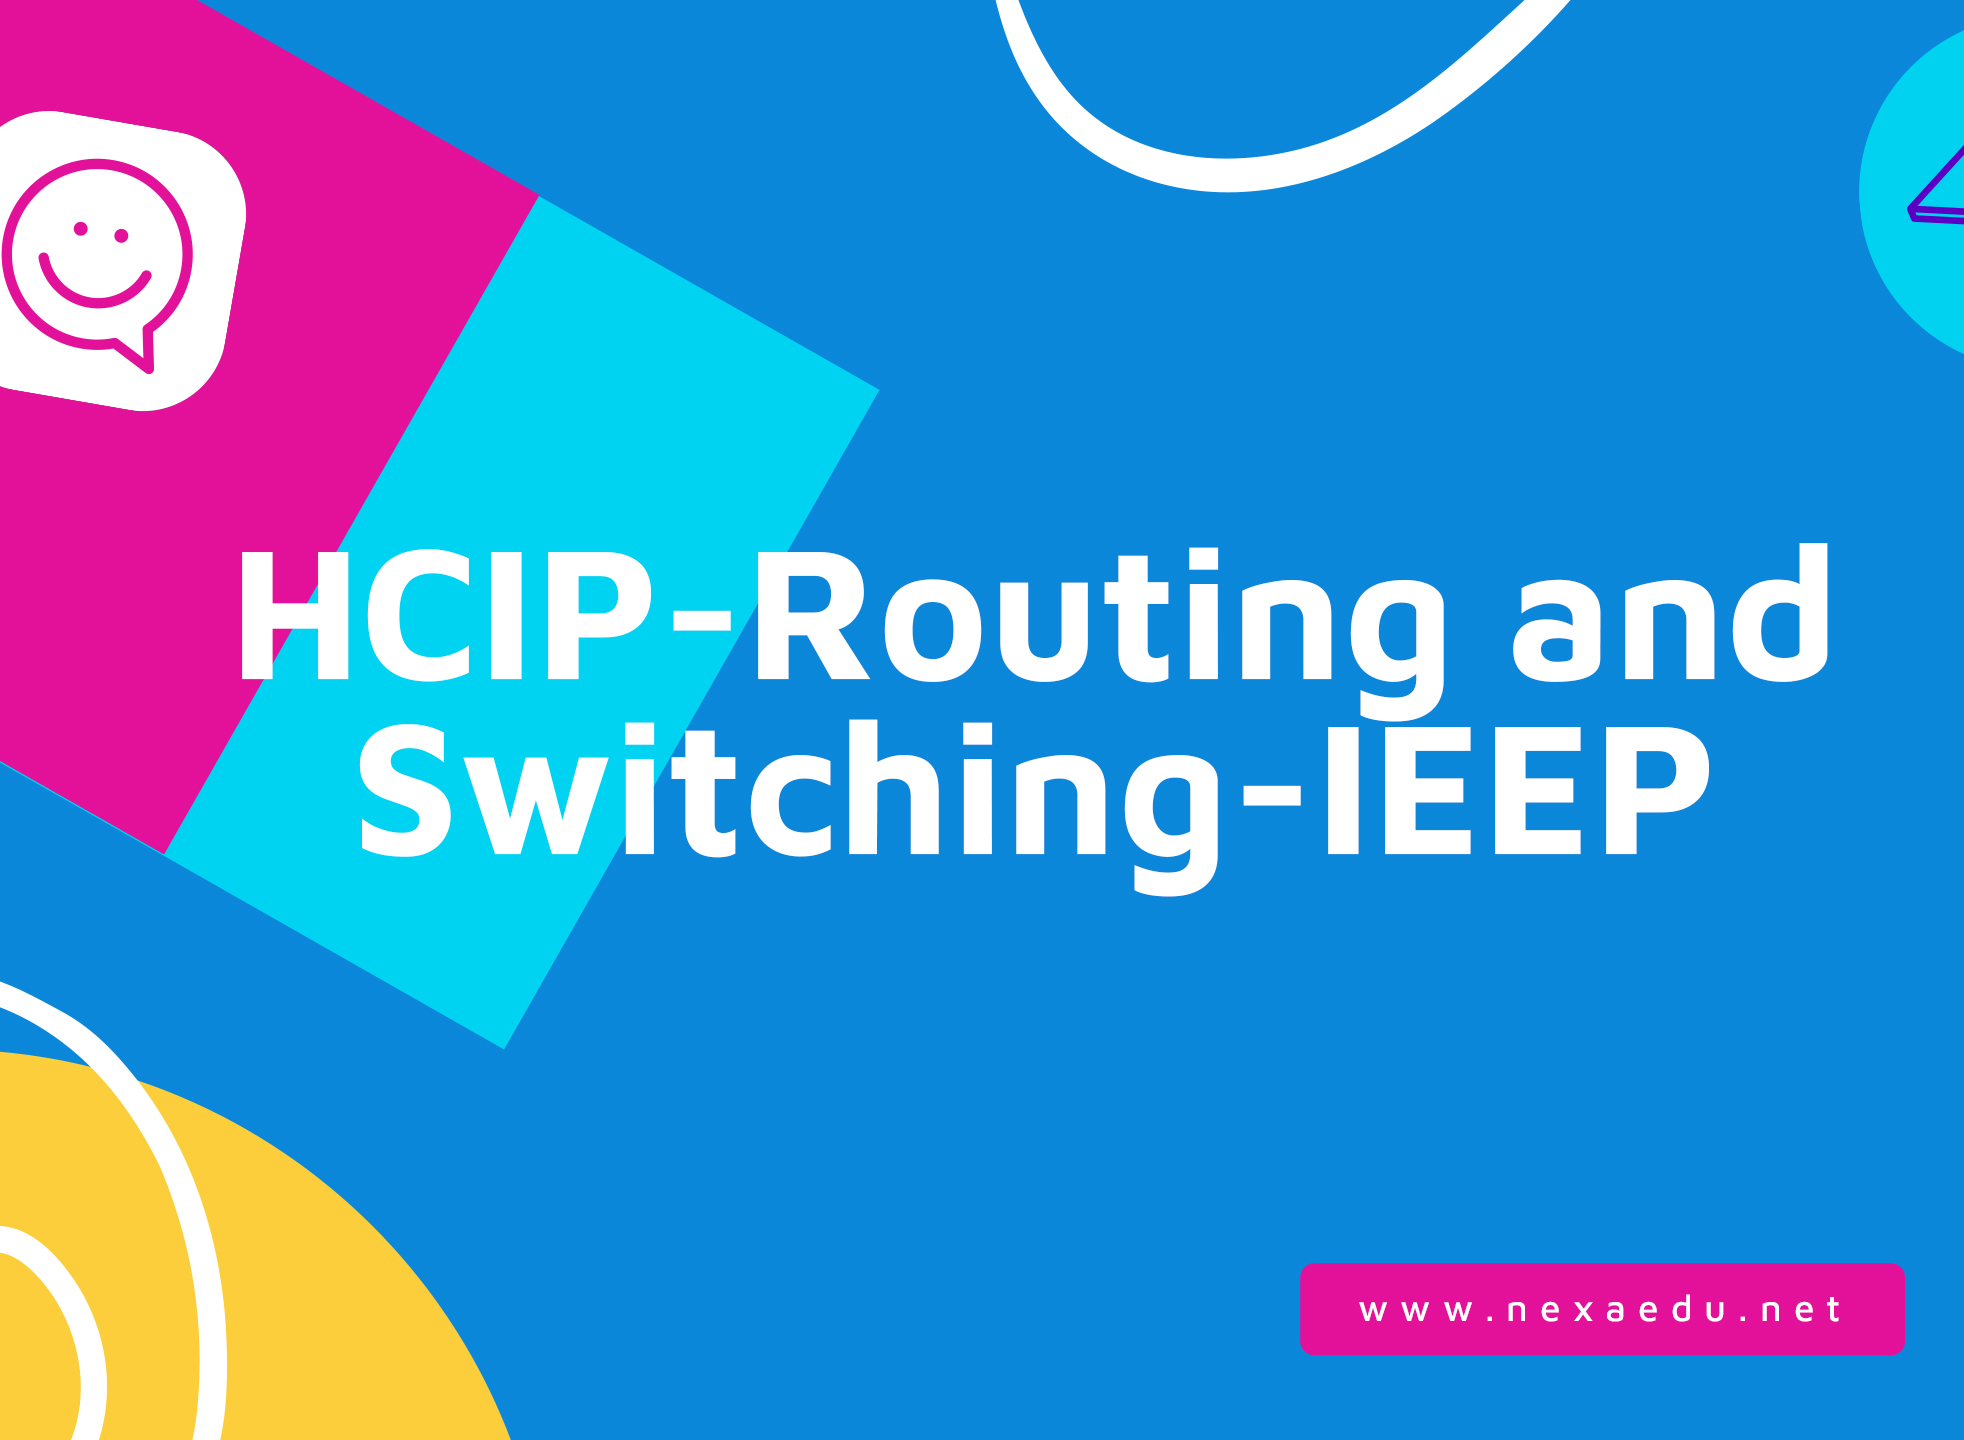 HCIP-Routing and Switching-IEEP